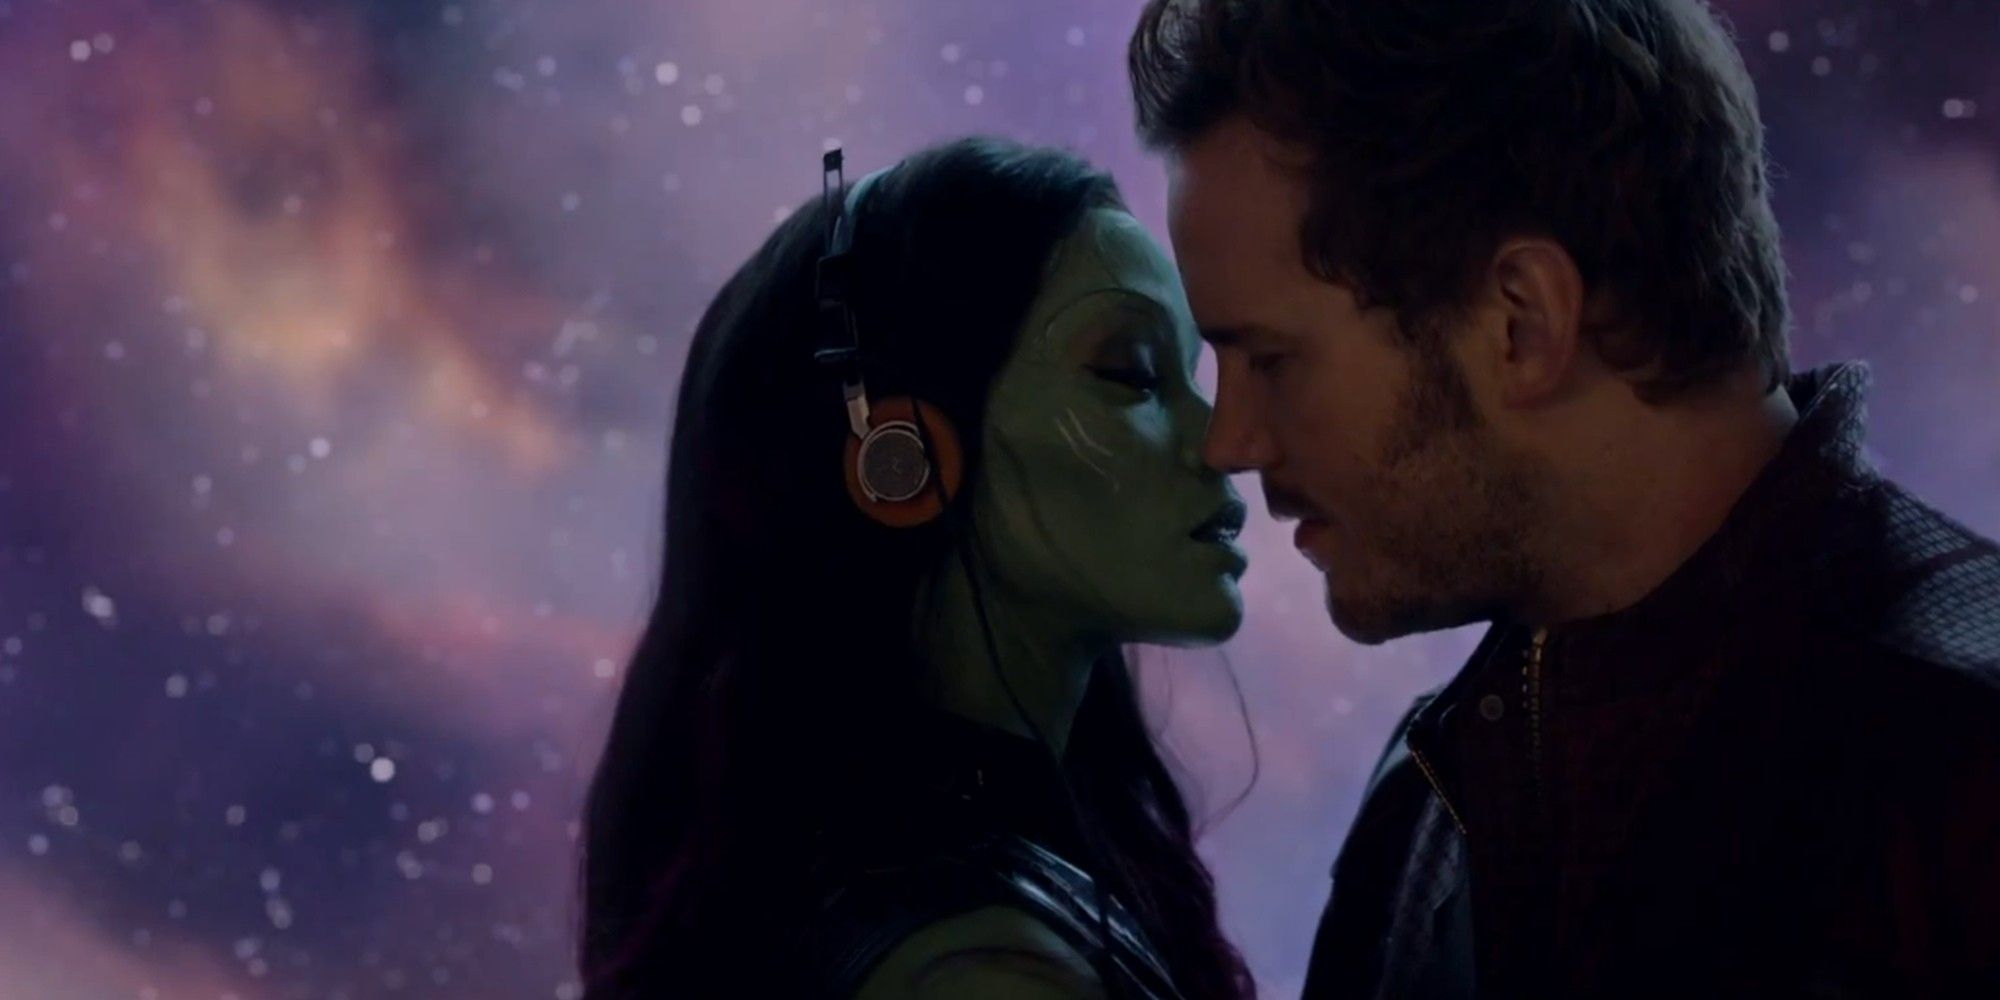 Star Lord and Gamora kissing in Footloose scene